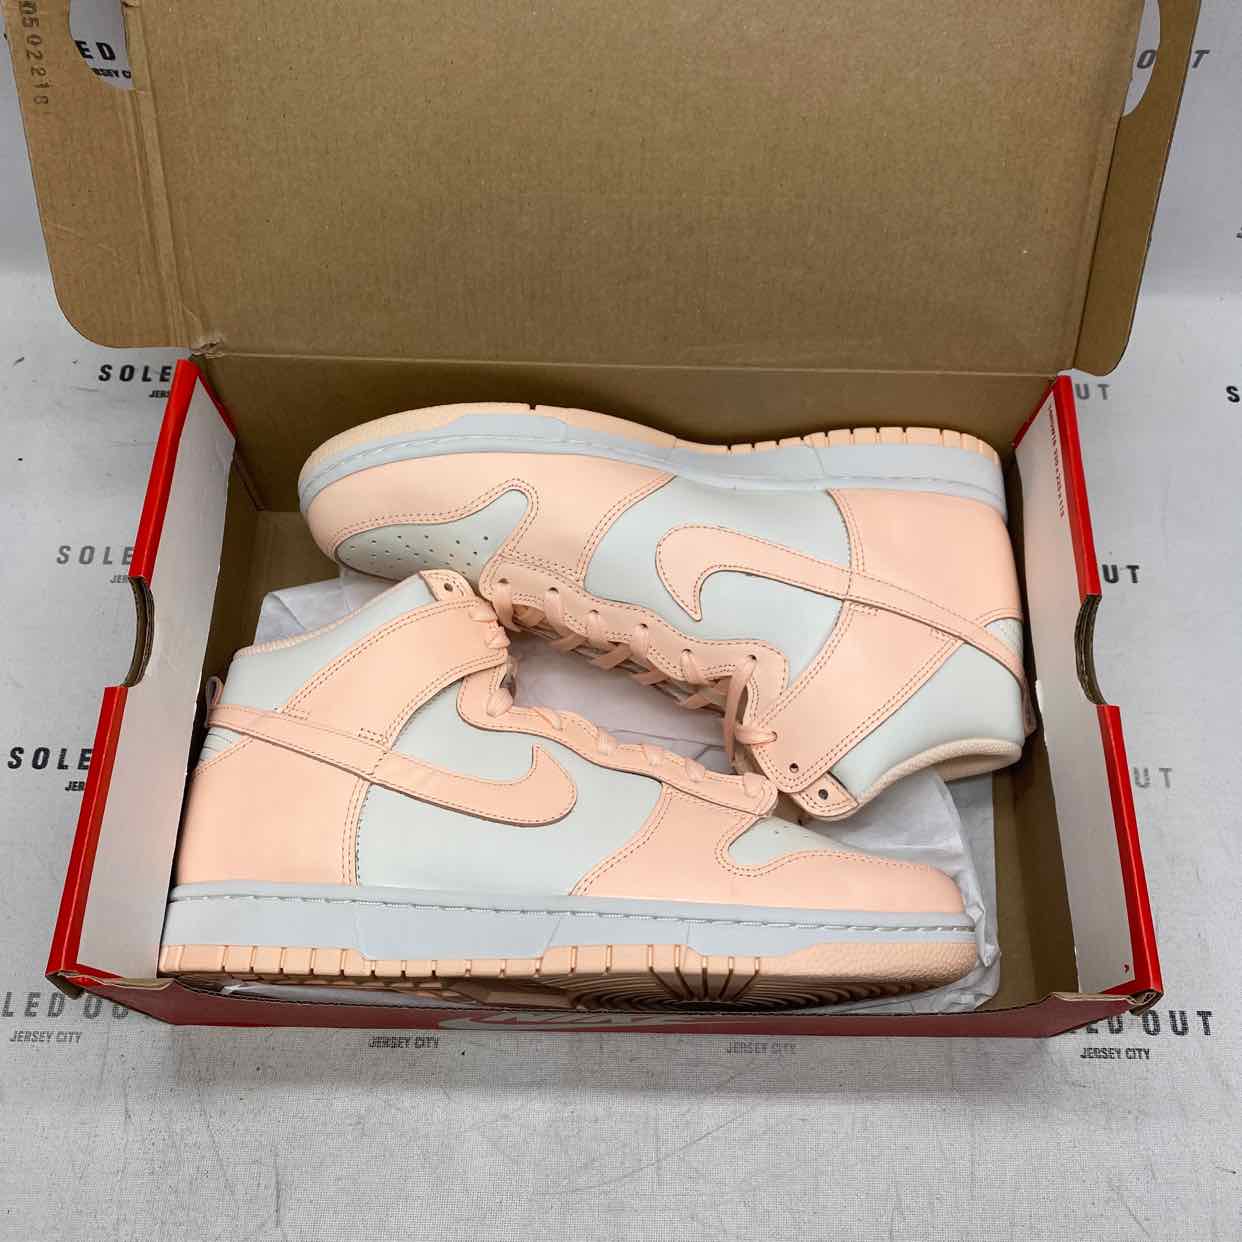 Nike (W) Dunk High &quot;Crimson Tint&quot; 2021 New Size 11W